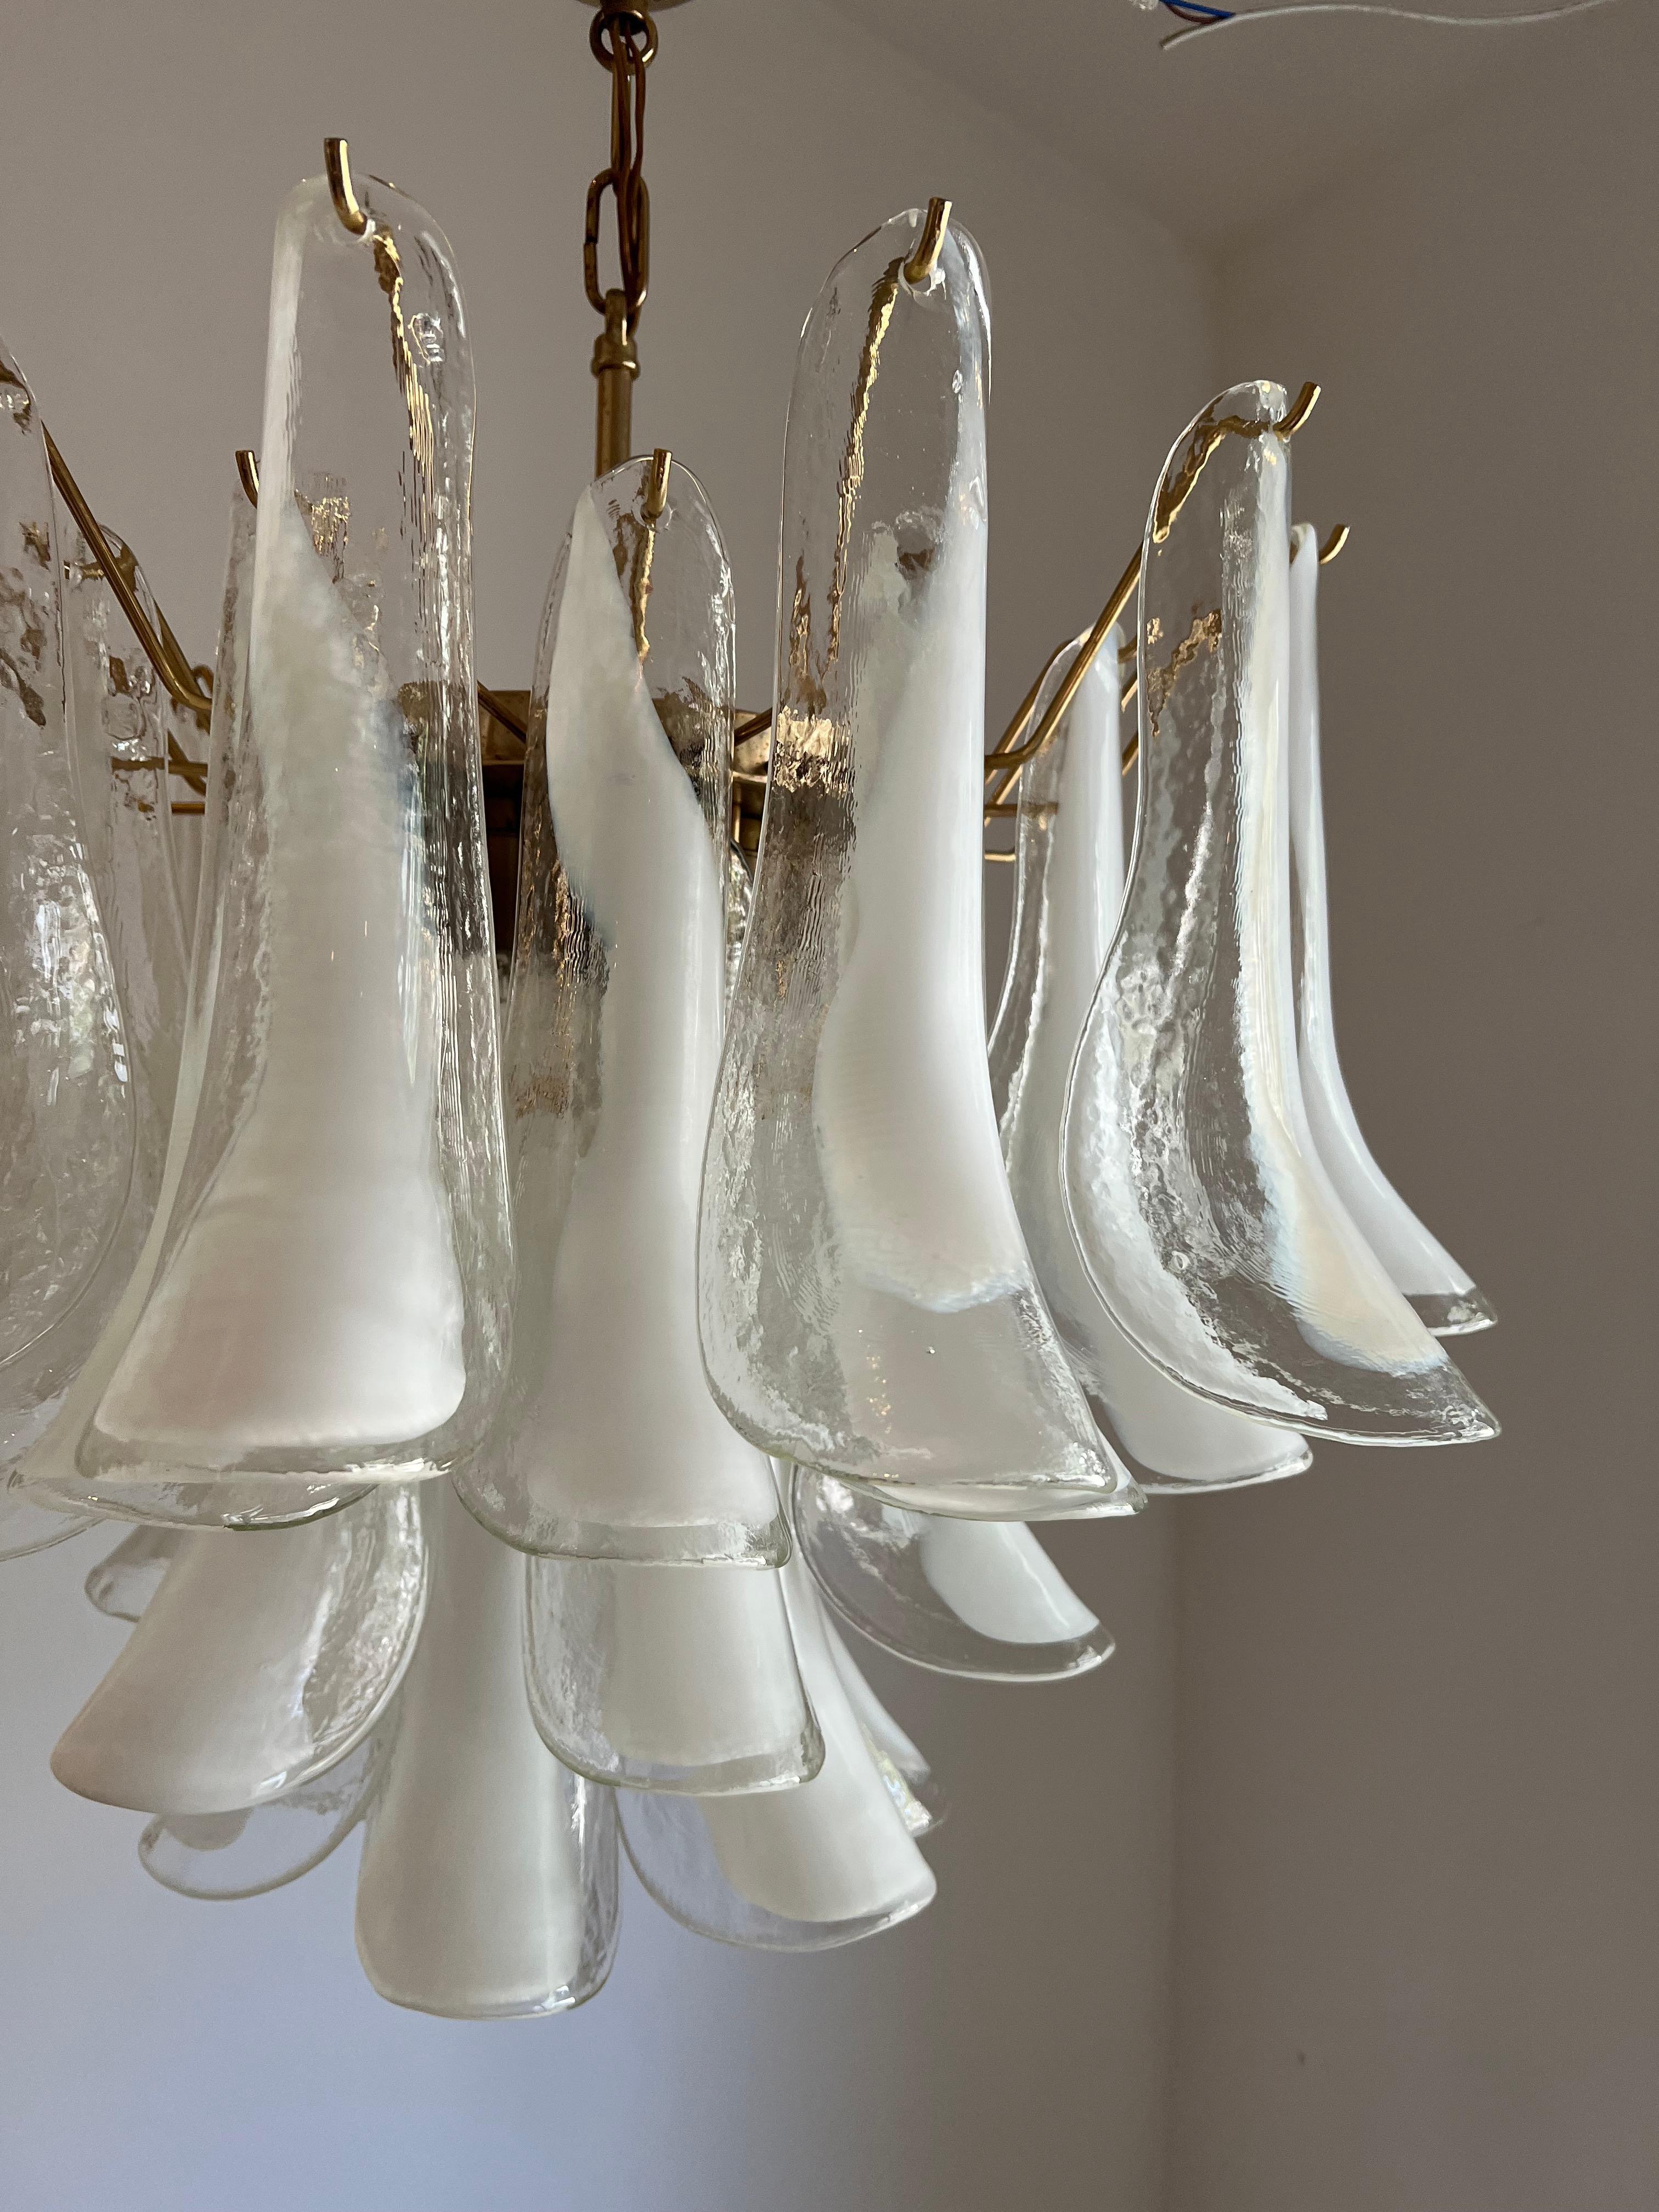 20th Century Two Identical Signed Mid-Century Modern Chandeliers, La Murrina in Murano Glass For Sale